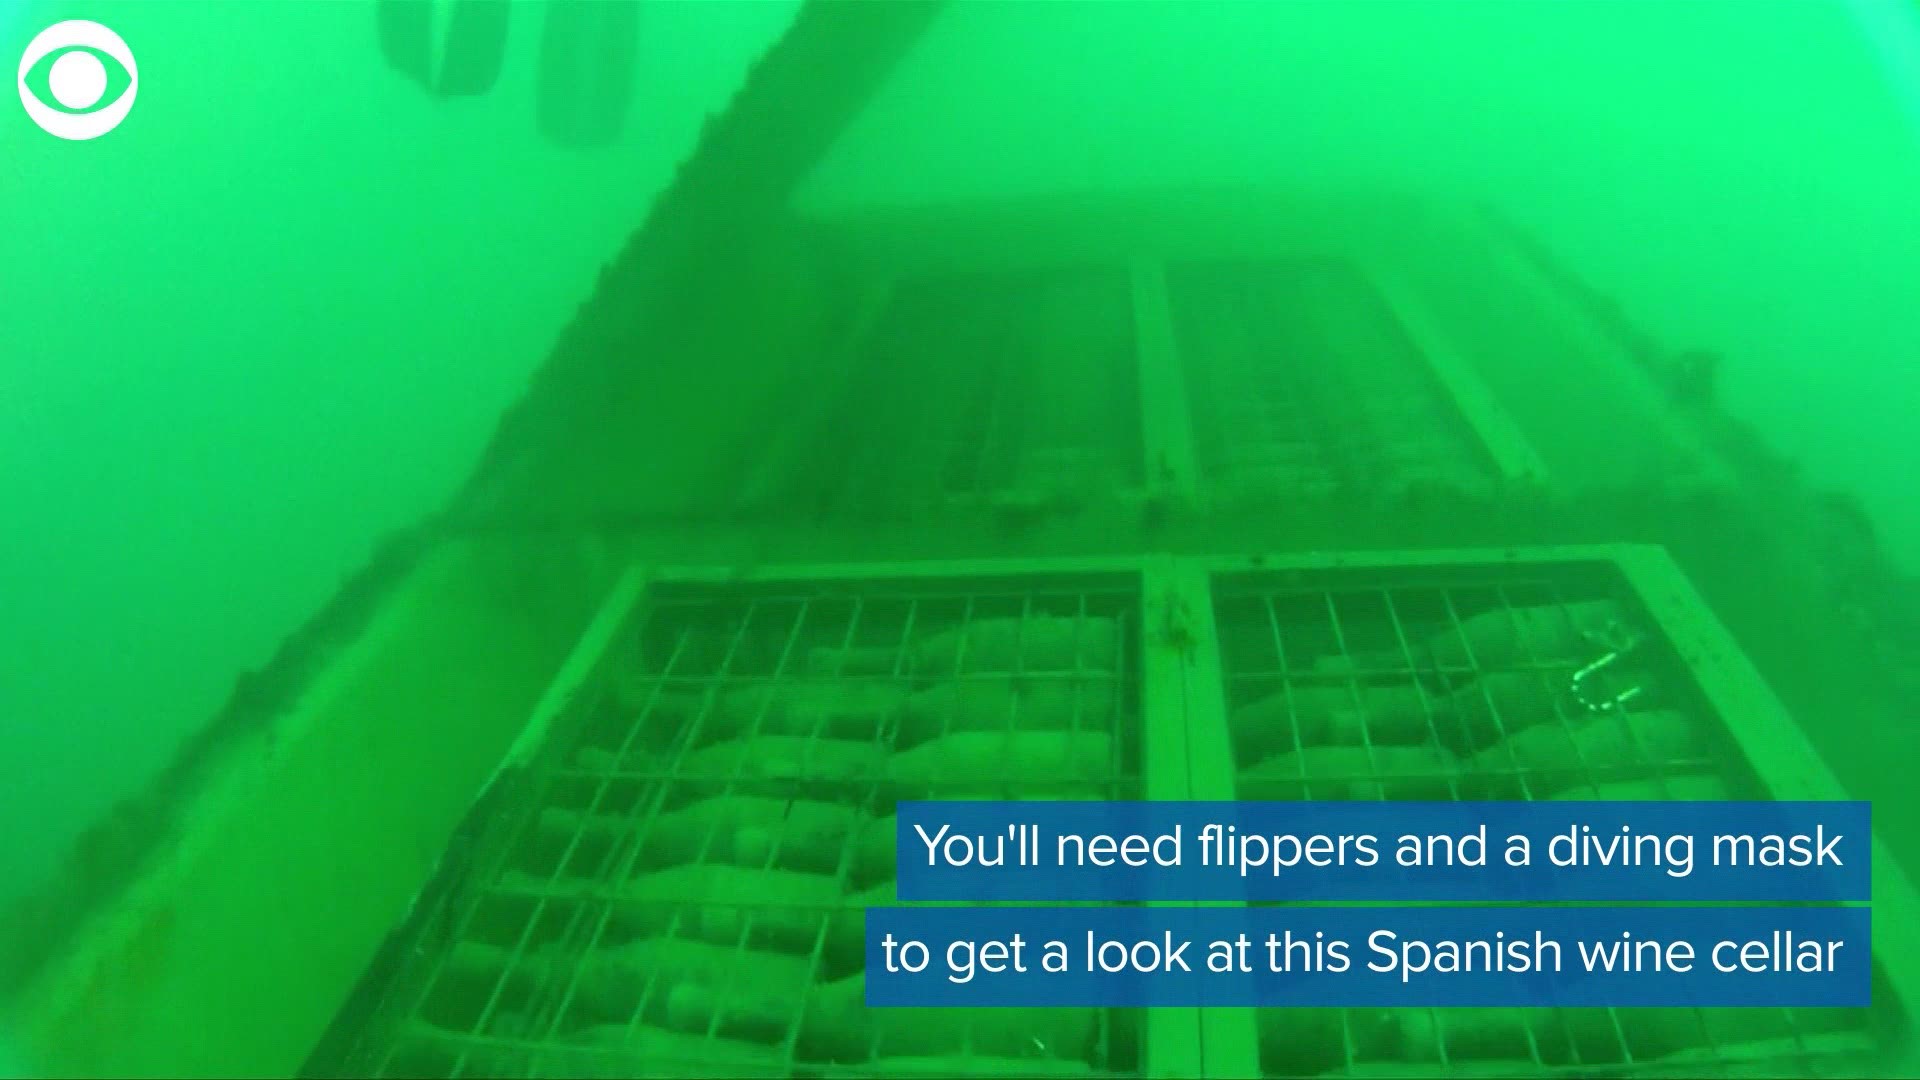 A winery near Bilbao, Spain keeps its cellar in an unusual place. Take a look at how Crusoe Treasure has taken its wine-making operation under the sea.